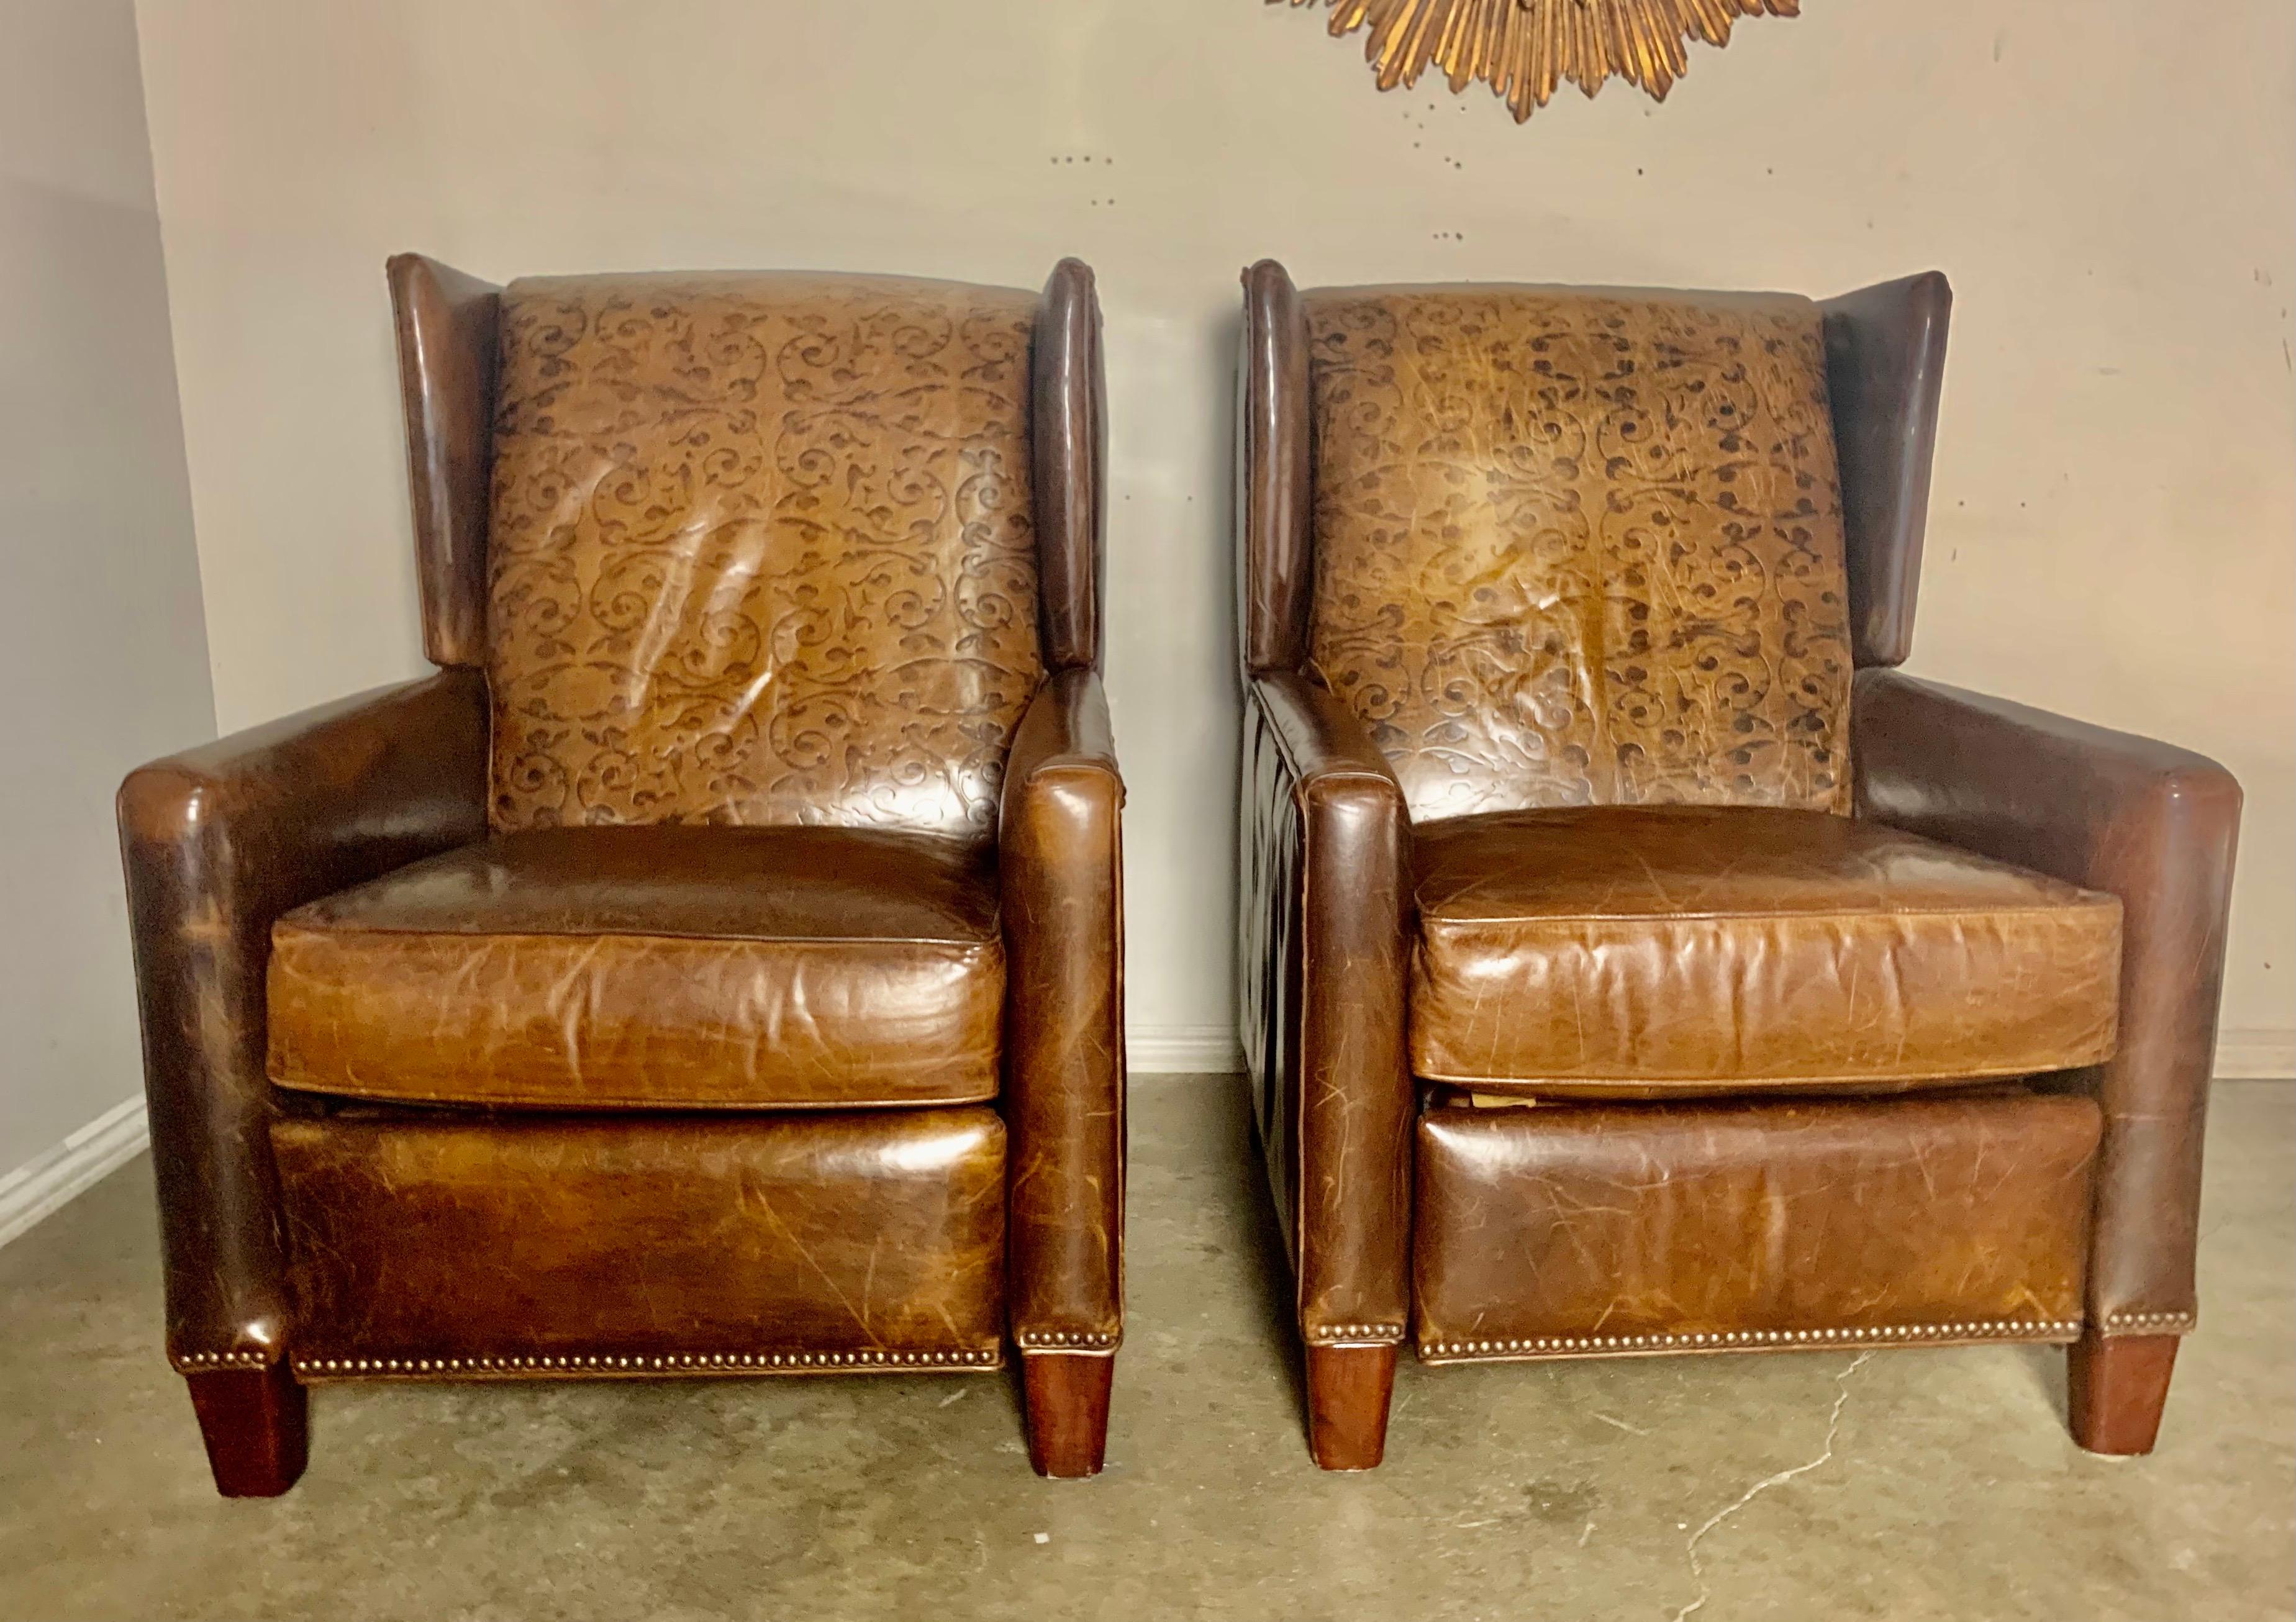 Pair of embossed leather armchairs / recliners. They are extremely comfortable and still work perfectly. There are marks on the leather but no tears or holes. Brass nailhead trim detail throughout.